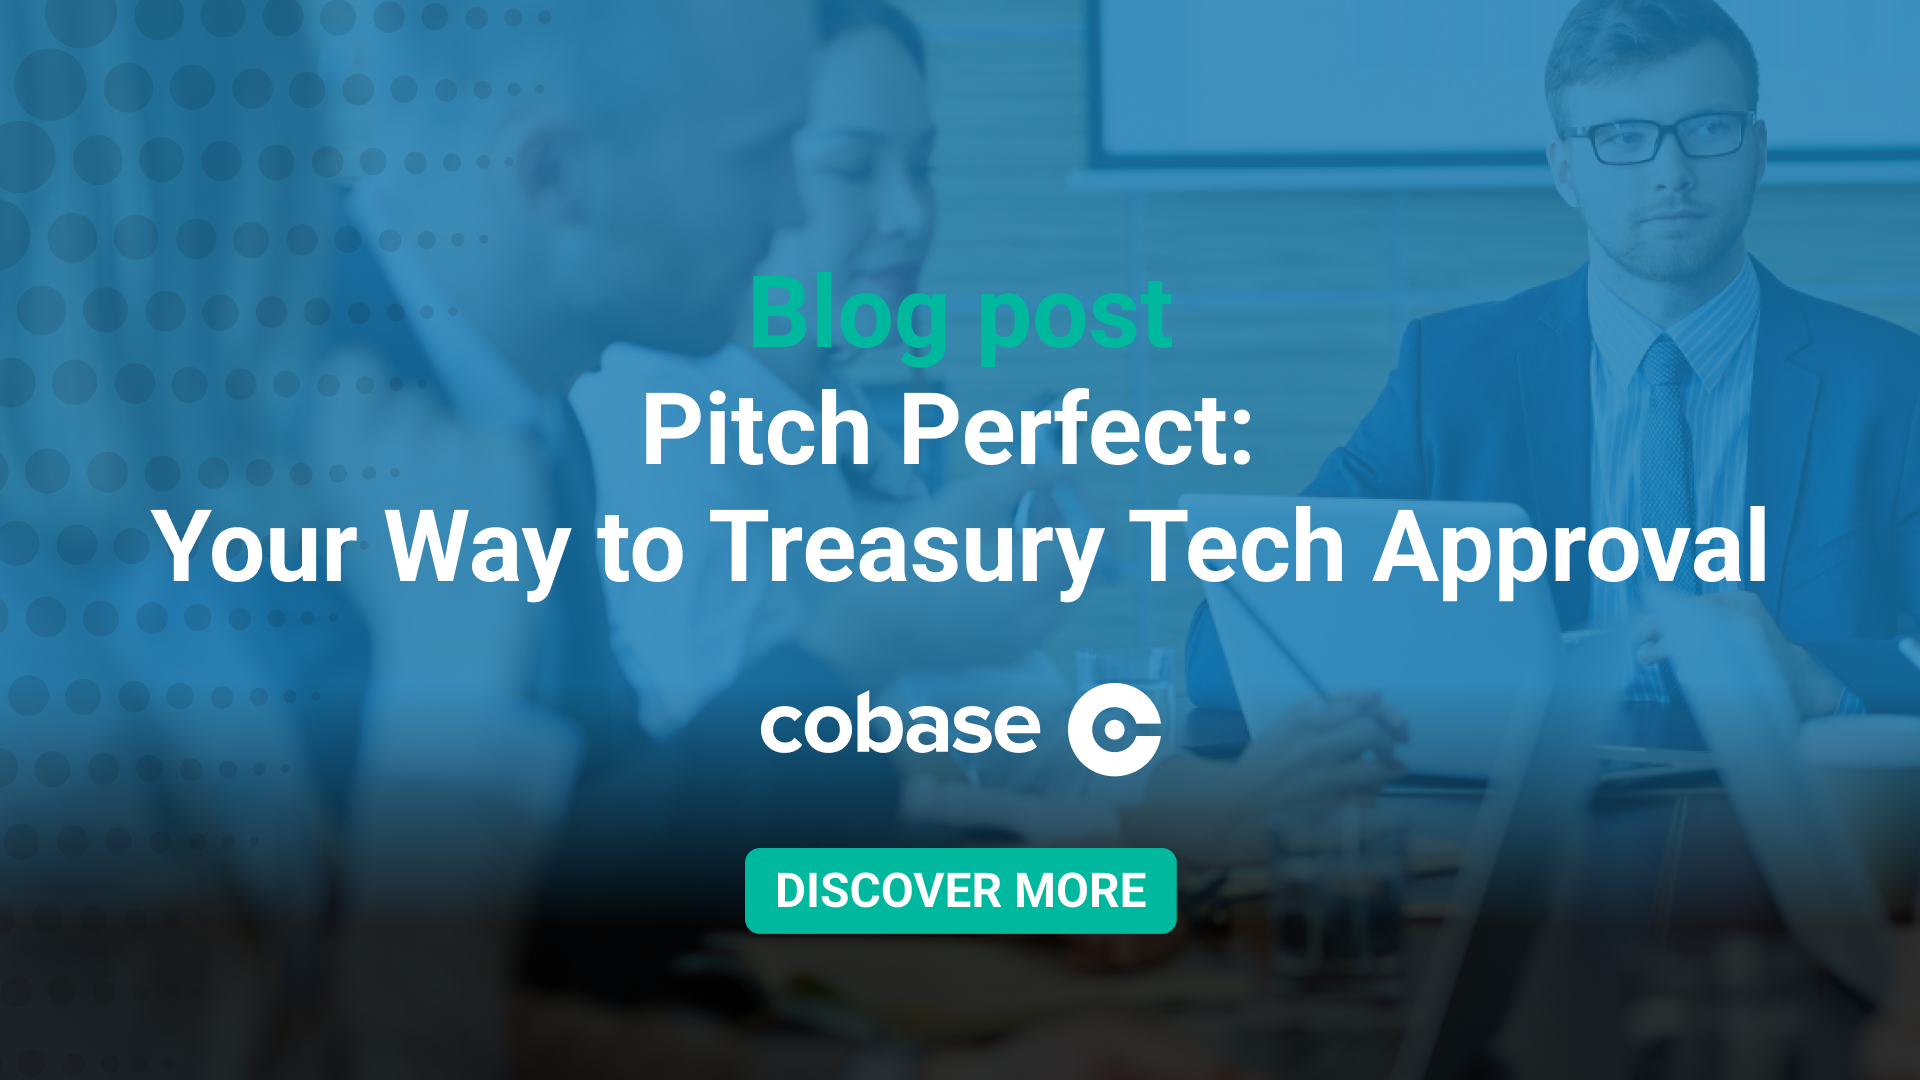 Pitch Perfect: Your Way to Treasury Tech Approval